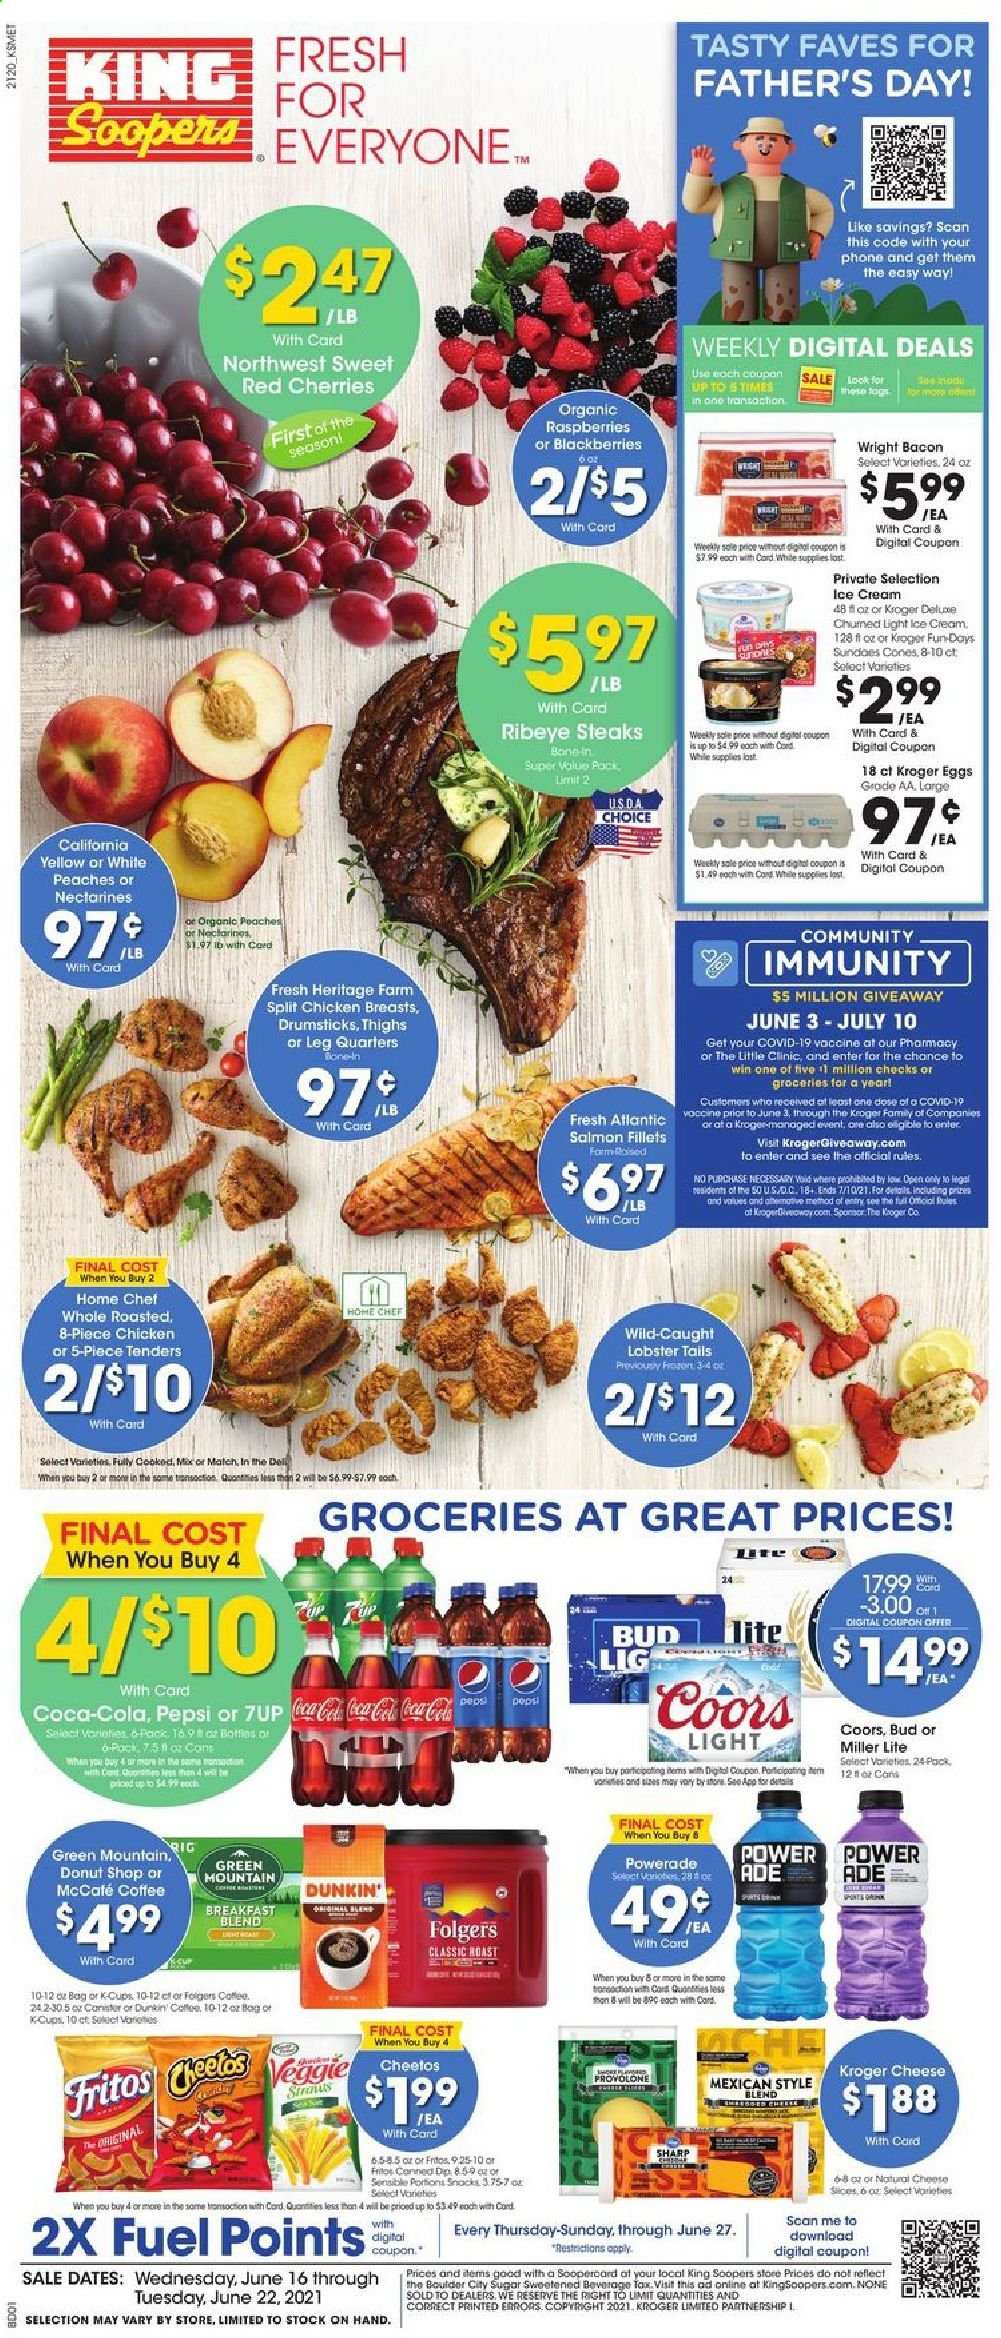 thumbnail - King Soopers Flyer - 06/16/2021 - 06/22/2021 - Sales products - blackberries, raspberries, cherries, cod, lobster, salmon, salmon fillet, lobster tail, bacon, cheese, Provolone, eggs, ice cream, Fritos, Cheetos, sugar, Coca-Cola, Powerade, Pepsi, 7UP, coffee, Folgers, breakfast blend, Green Mountain, beer, Miller Lite, Coors, chicken breasts, beef meat, steak, ribeye steak, Sharp, bag, nectarines, peaches. Page 1.